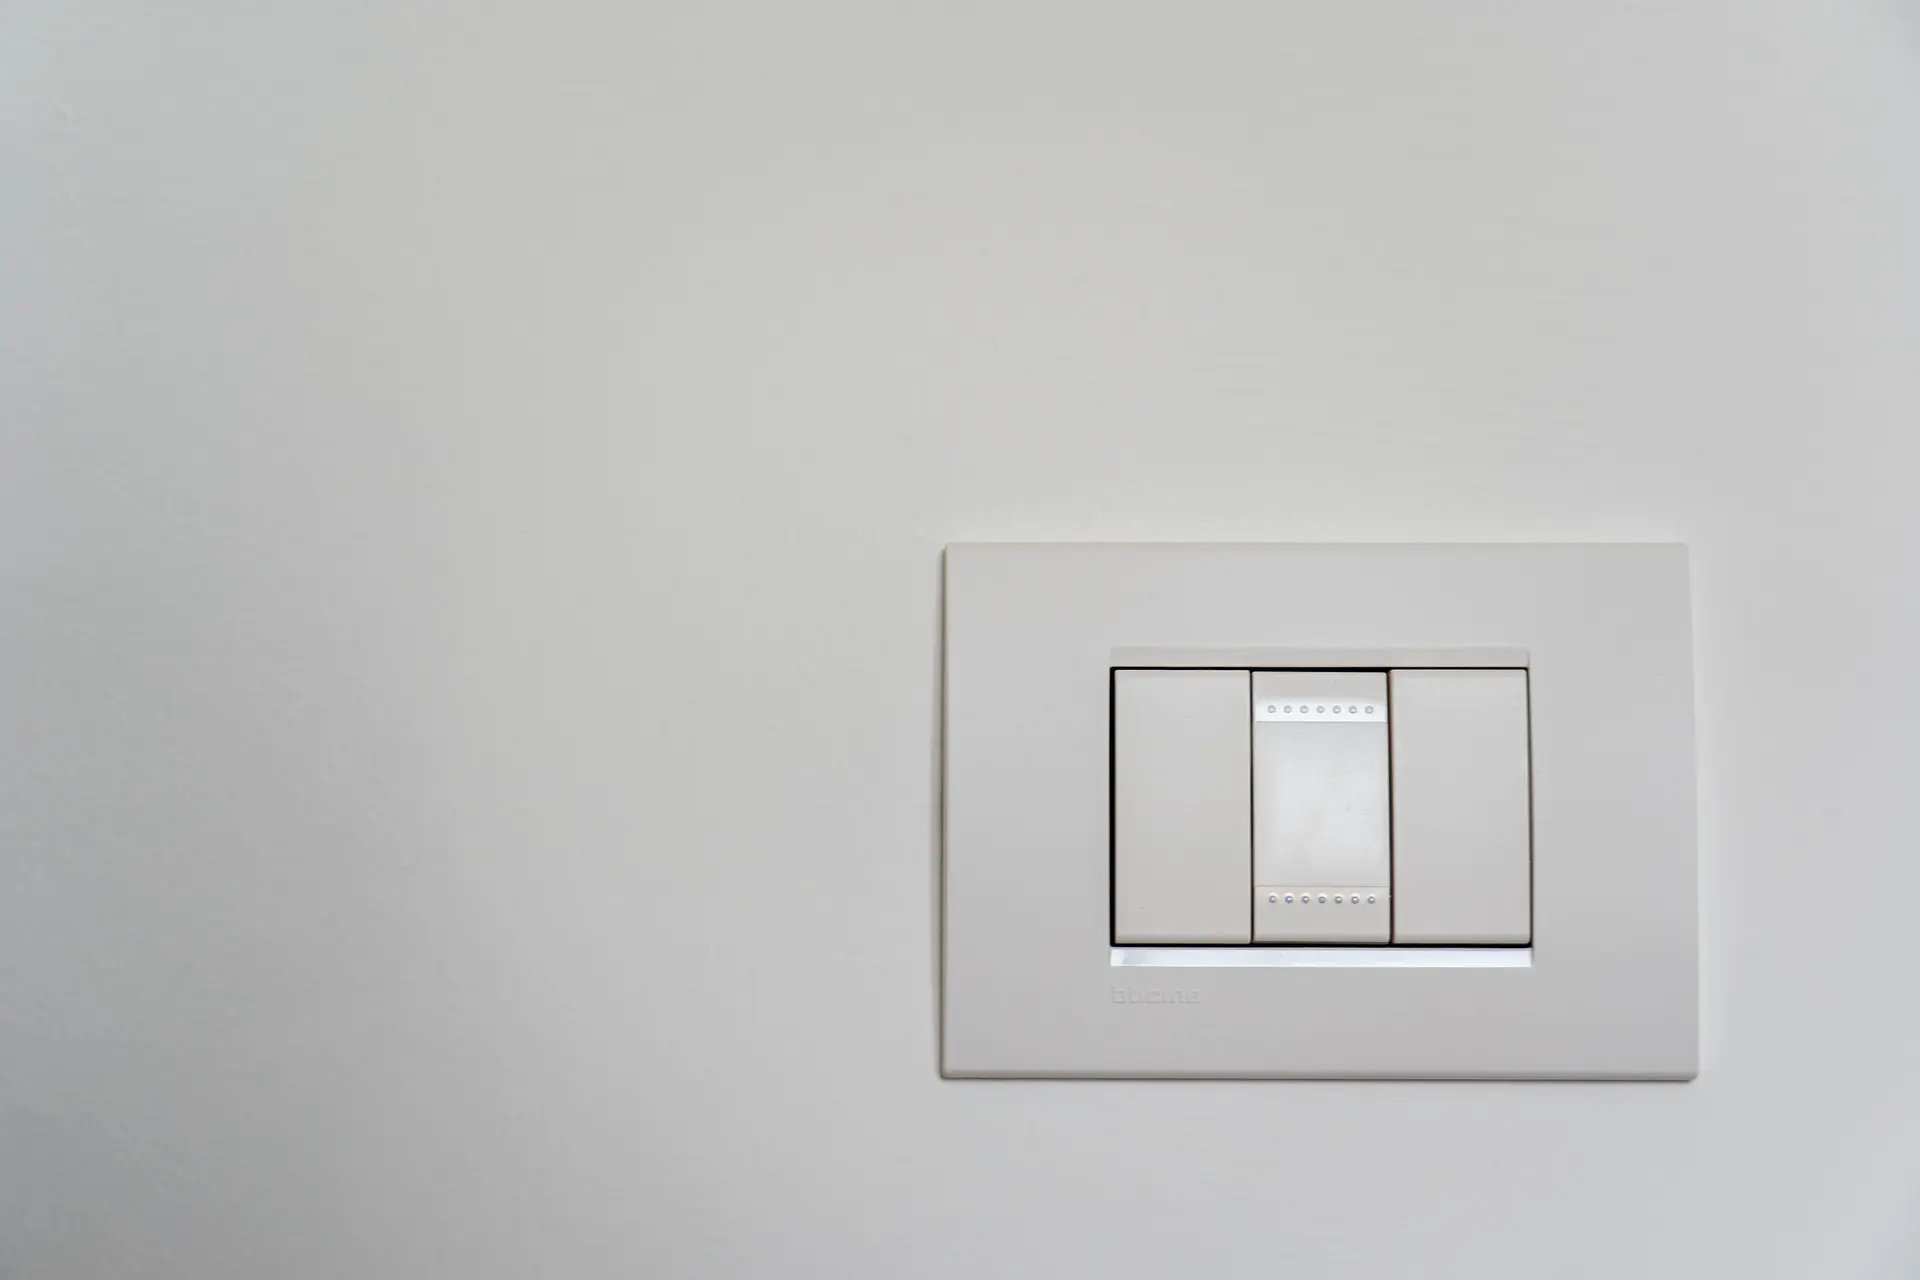 How To Install An LED Dimmer